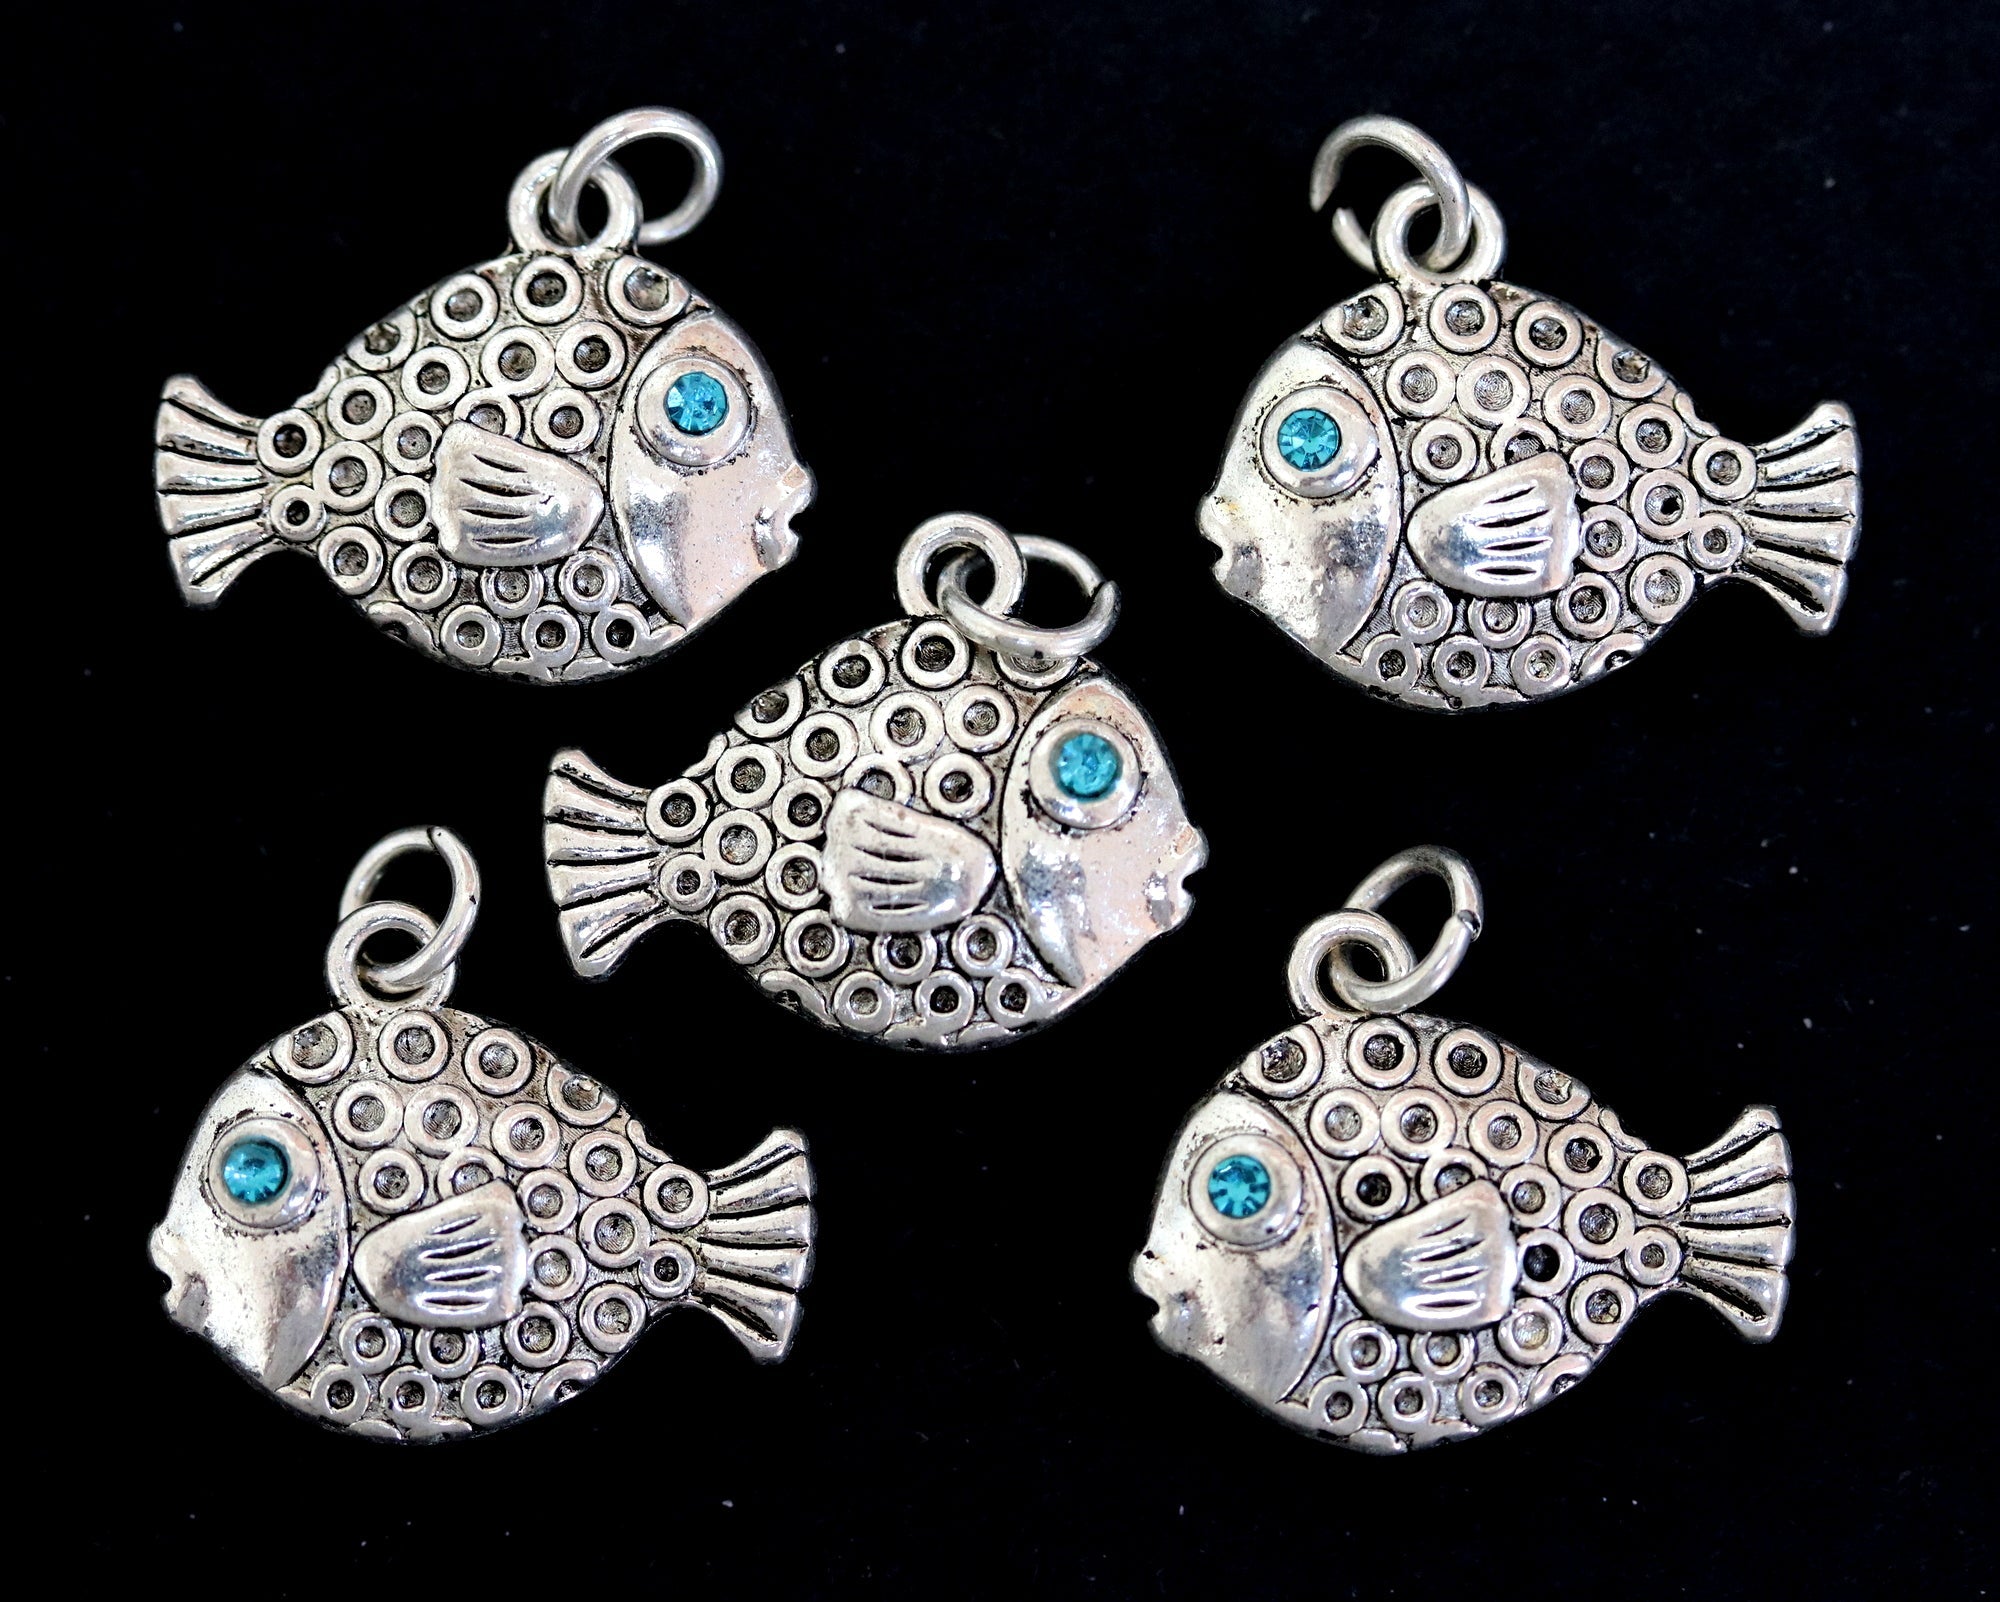 Fish charm 16x20mm antique silver plated metal alloy pendant